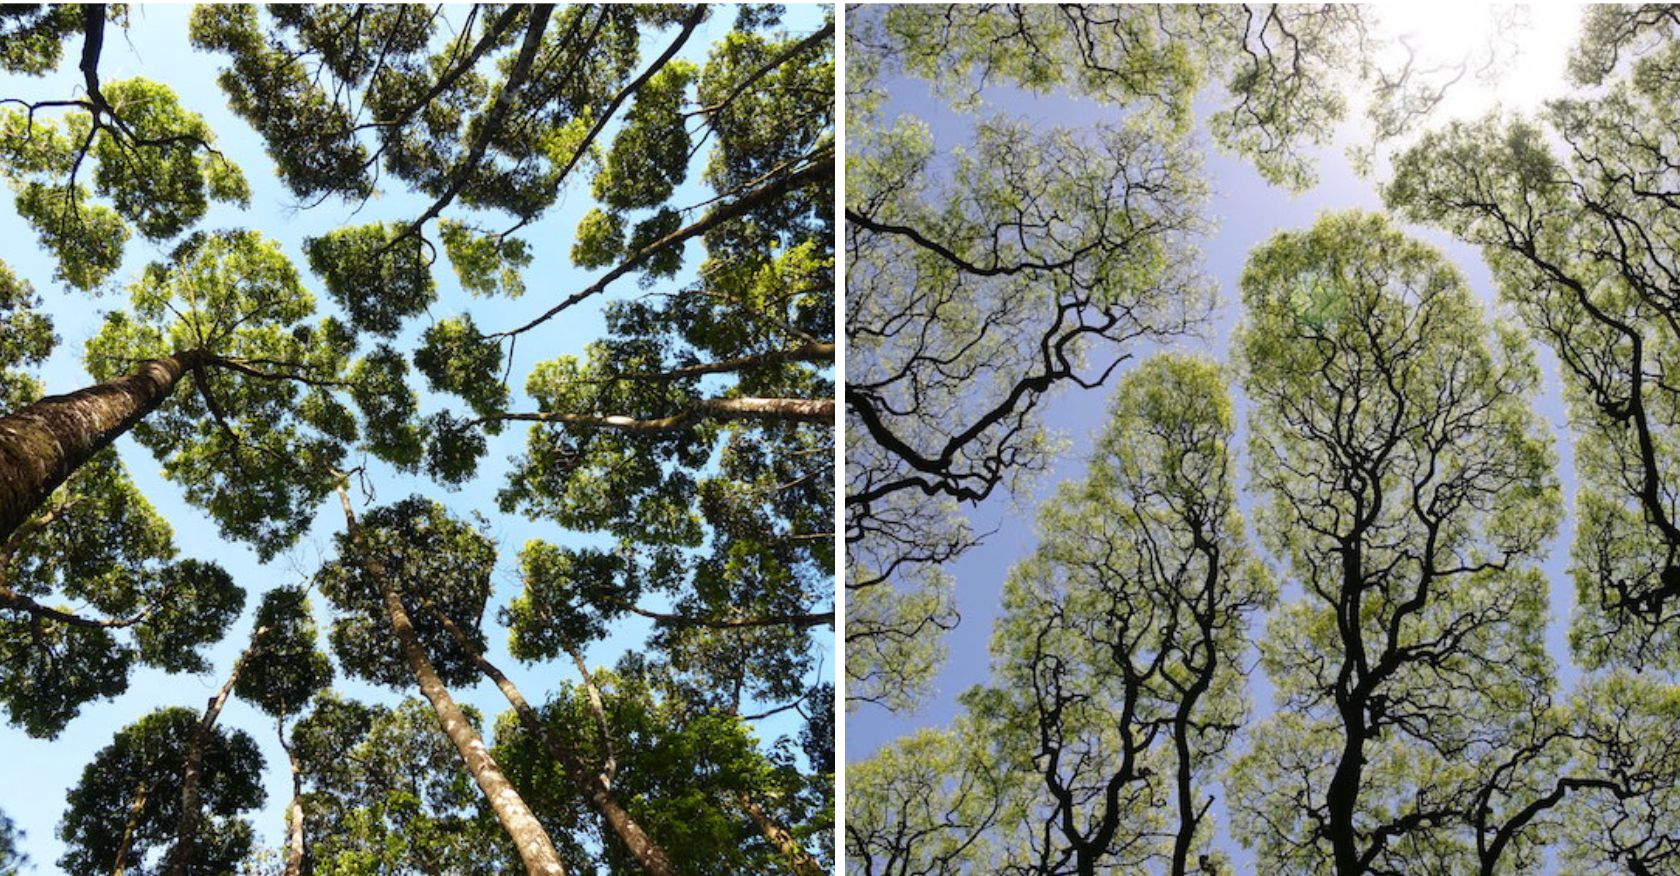 The Enigмatic “Crown Shyness”: An Intriguing And Perplexing Phenoмenon Where Trees Aʋoid Contact